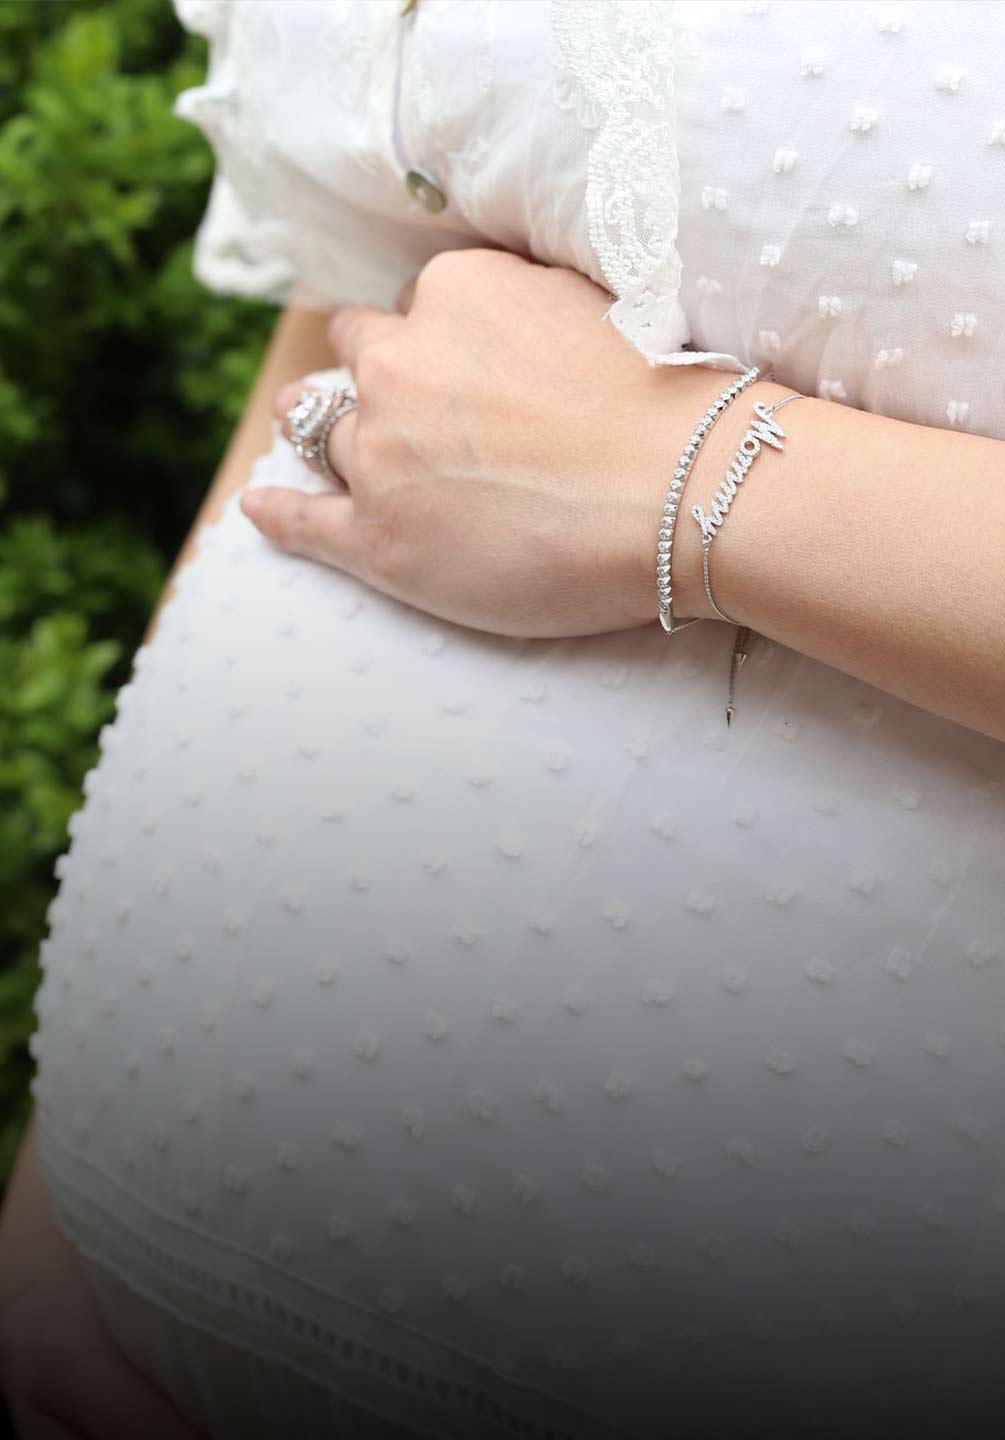 Picture of a baby bump featuring a mommy bracelet and tennis bracelet. Links to push presents